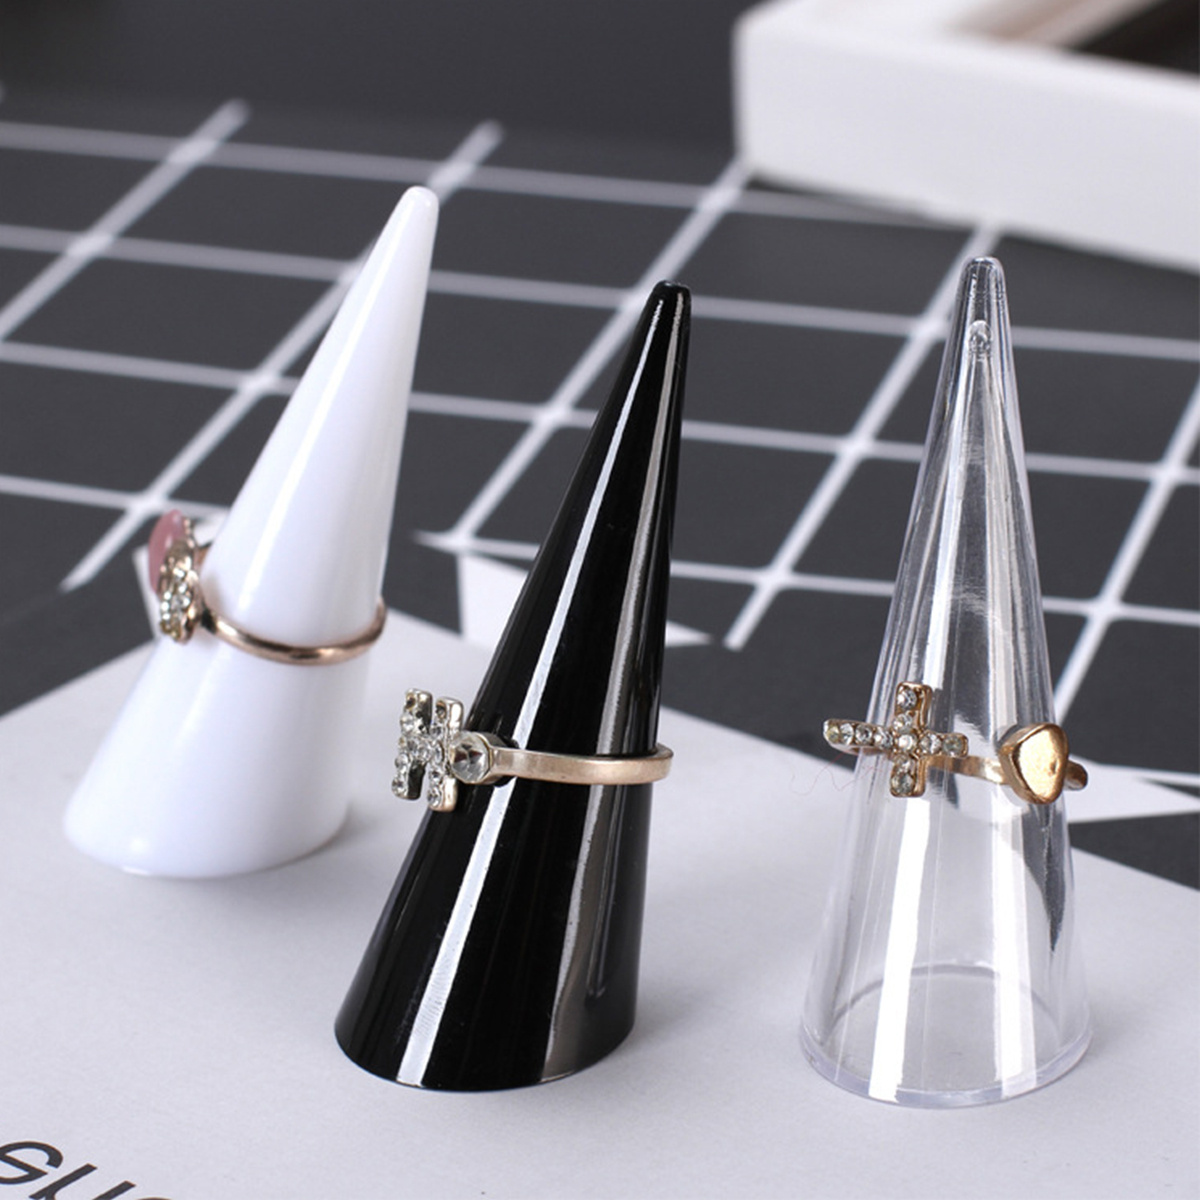 5pcs Random Ring Display Stand Cone Ring Stand at Our Store